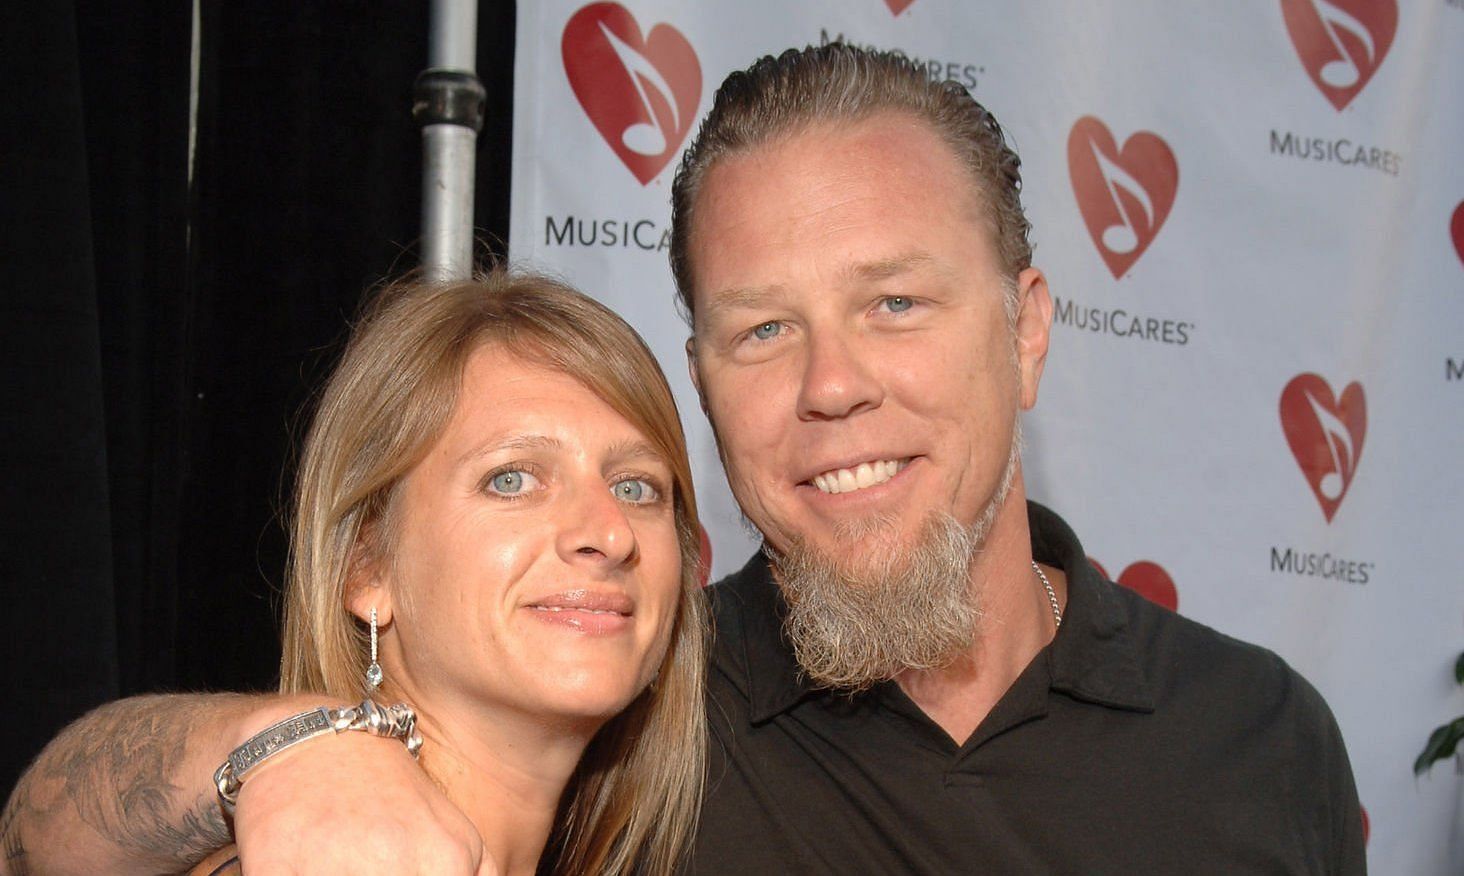 Francesca Hetfield helped James Hetfield to battle his addiction and anger issues (Image via Getty Images)